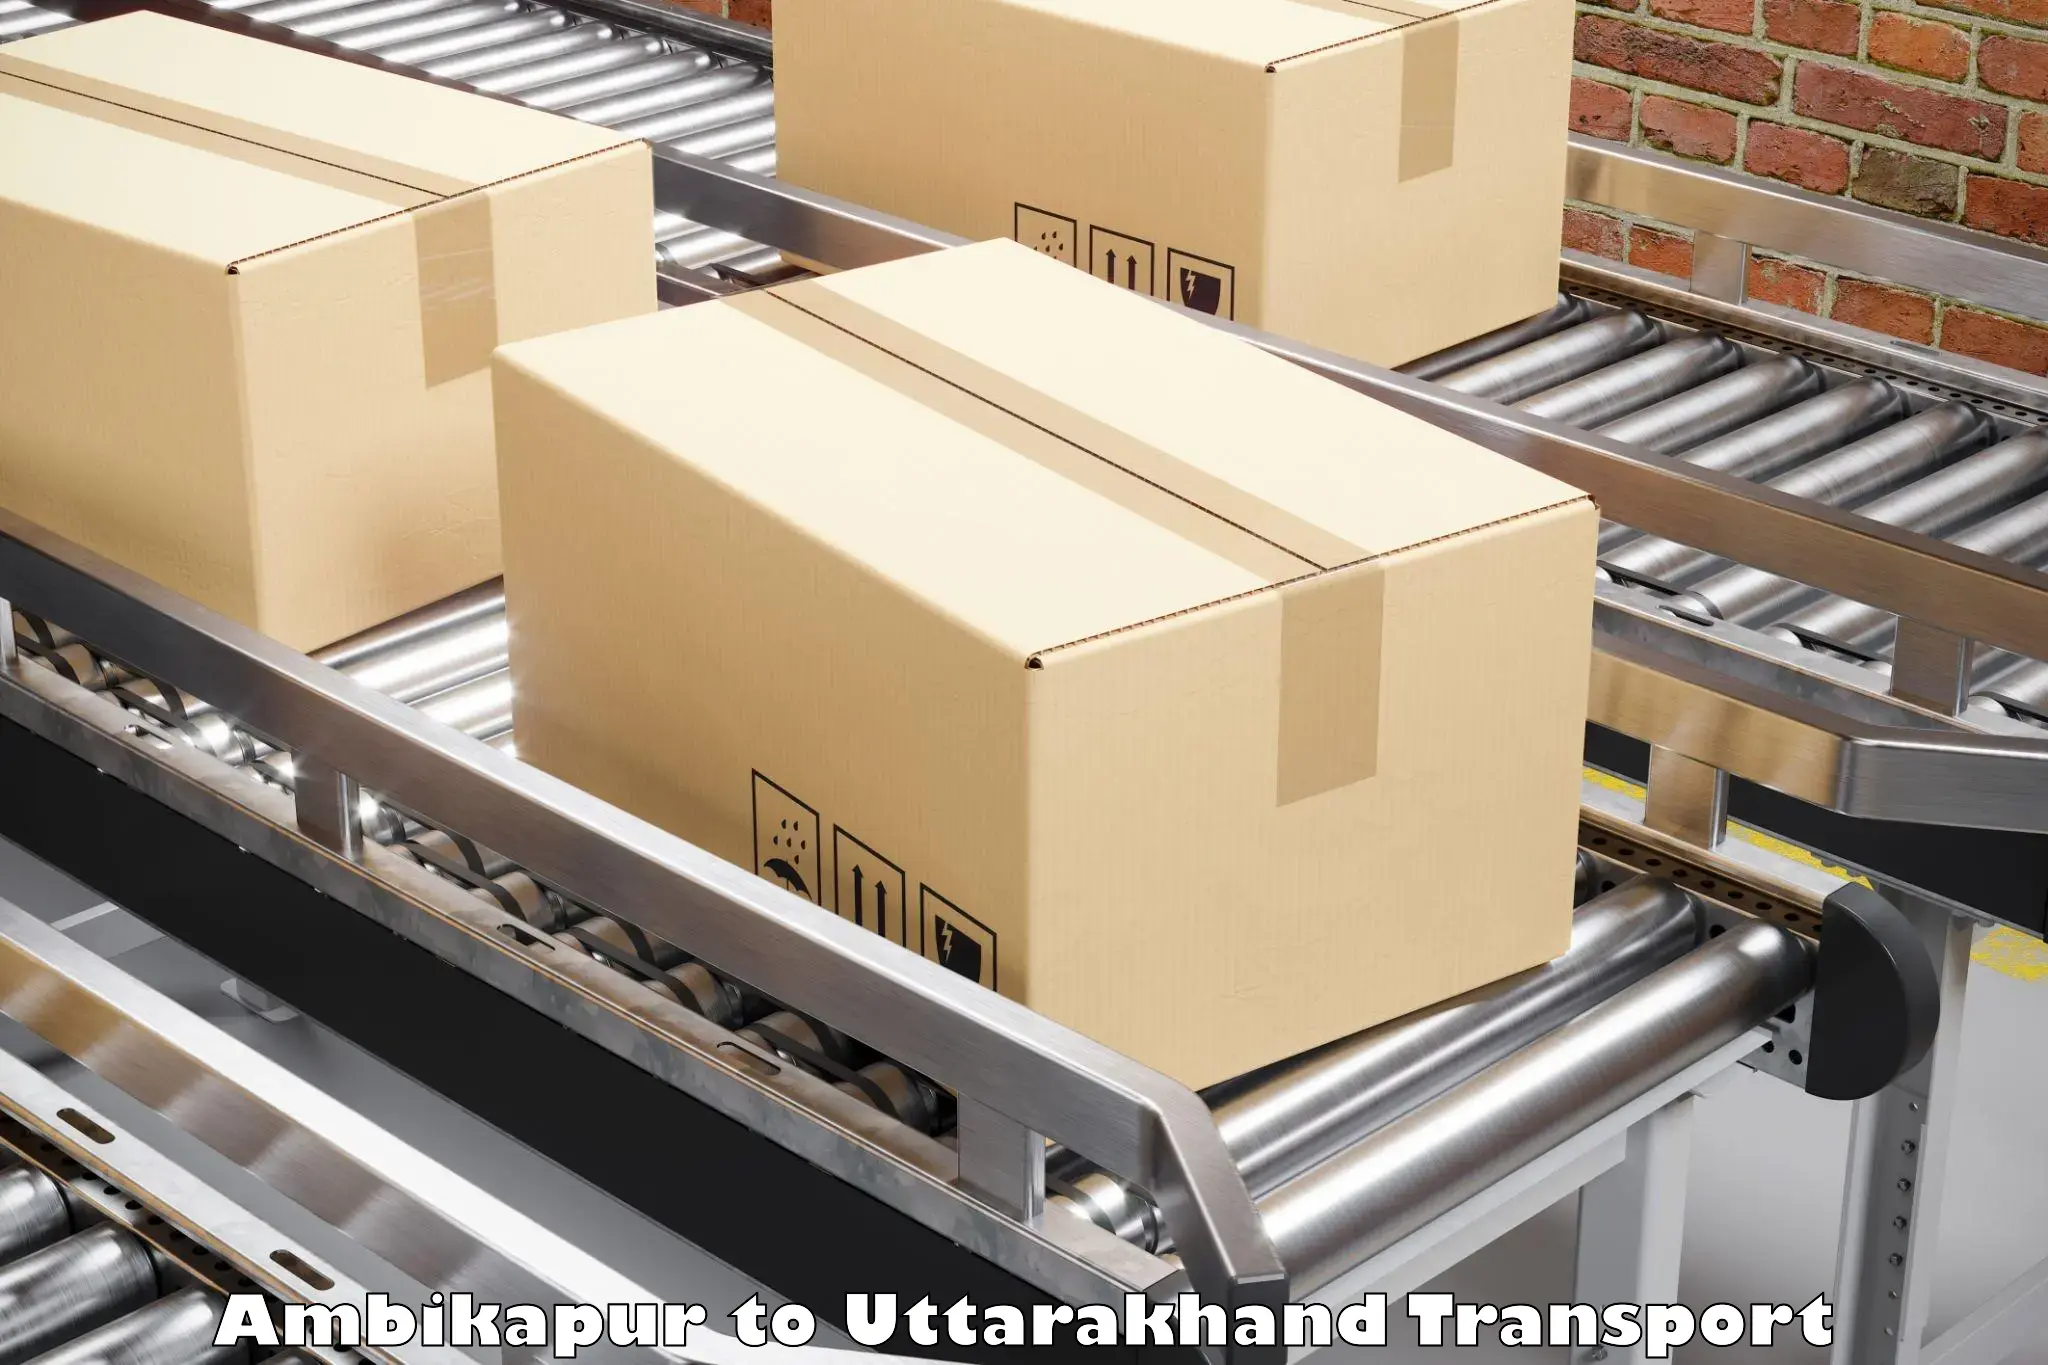 Road transport services in Ambikapur to IIT Roorkee